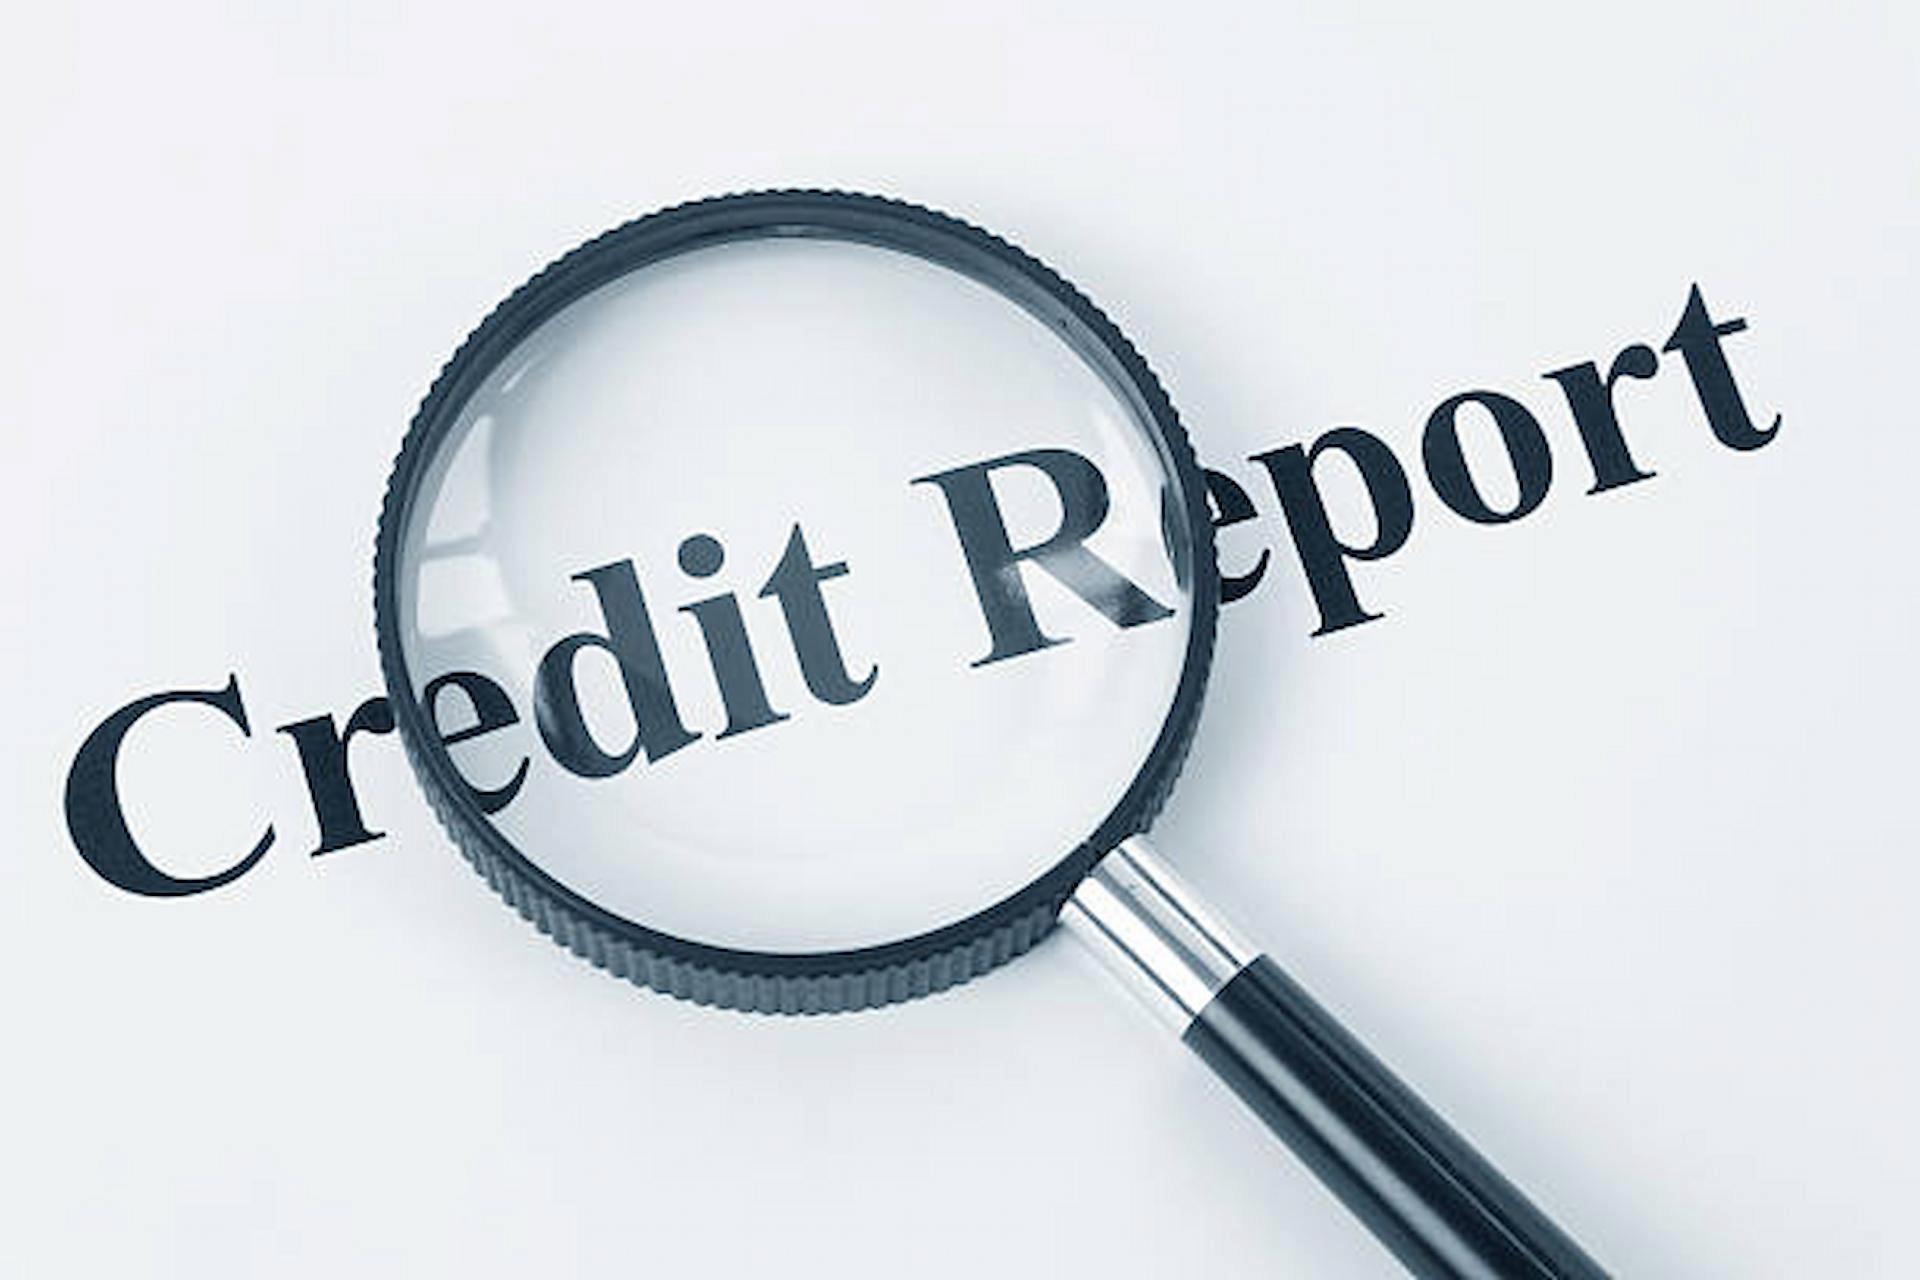 Free Annual Credit Report | keeps Fraudulence Away